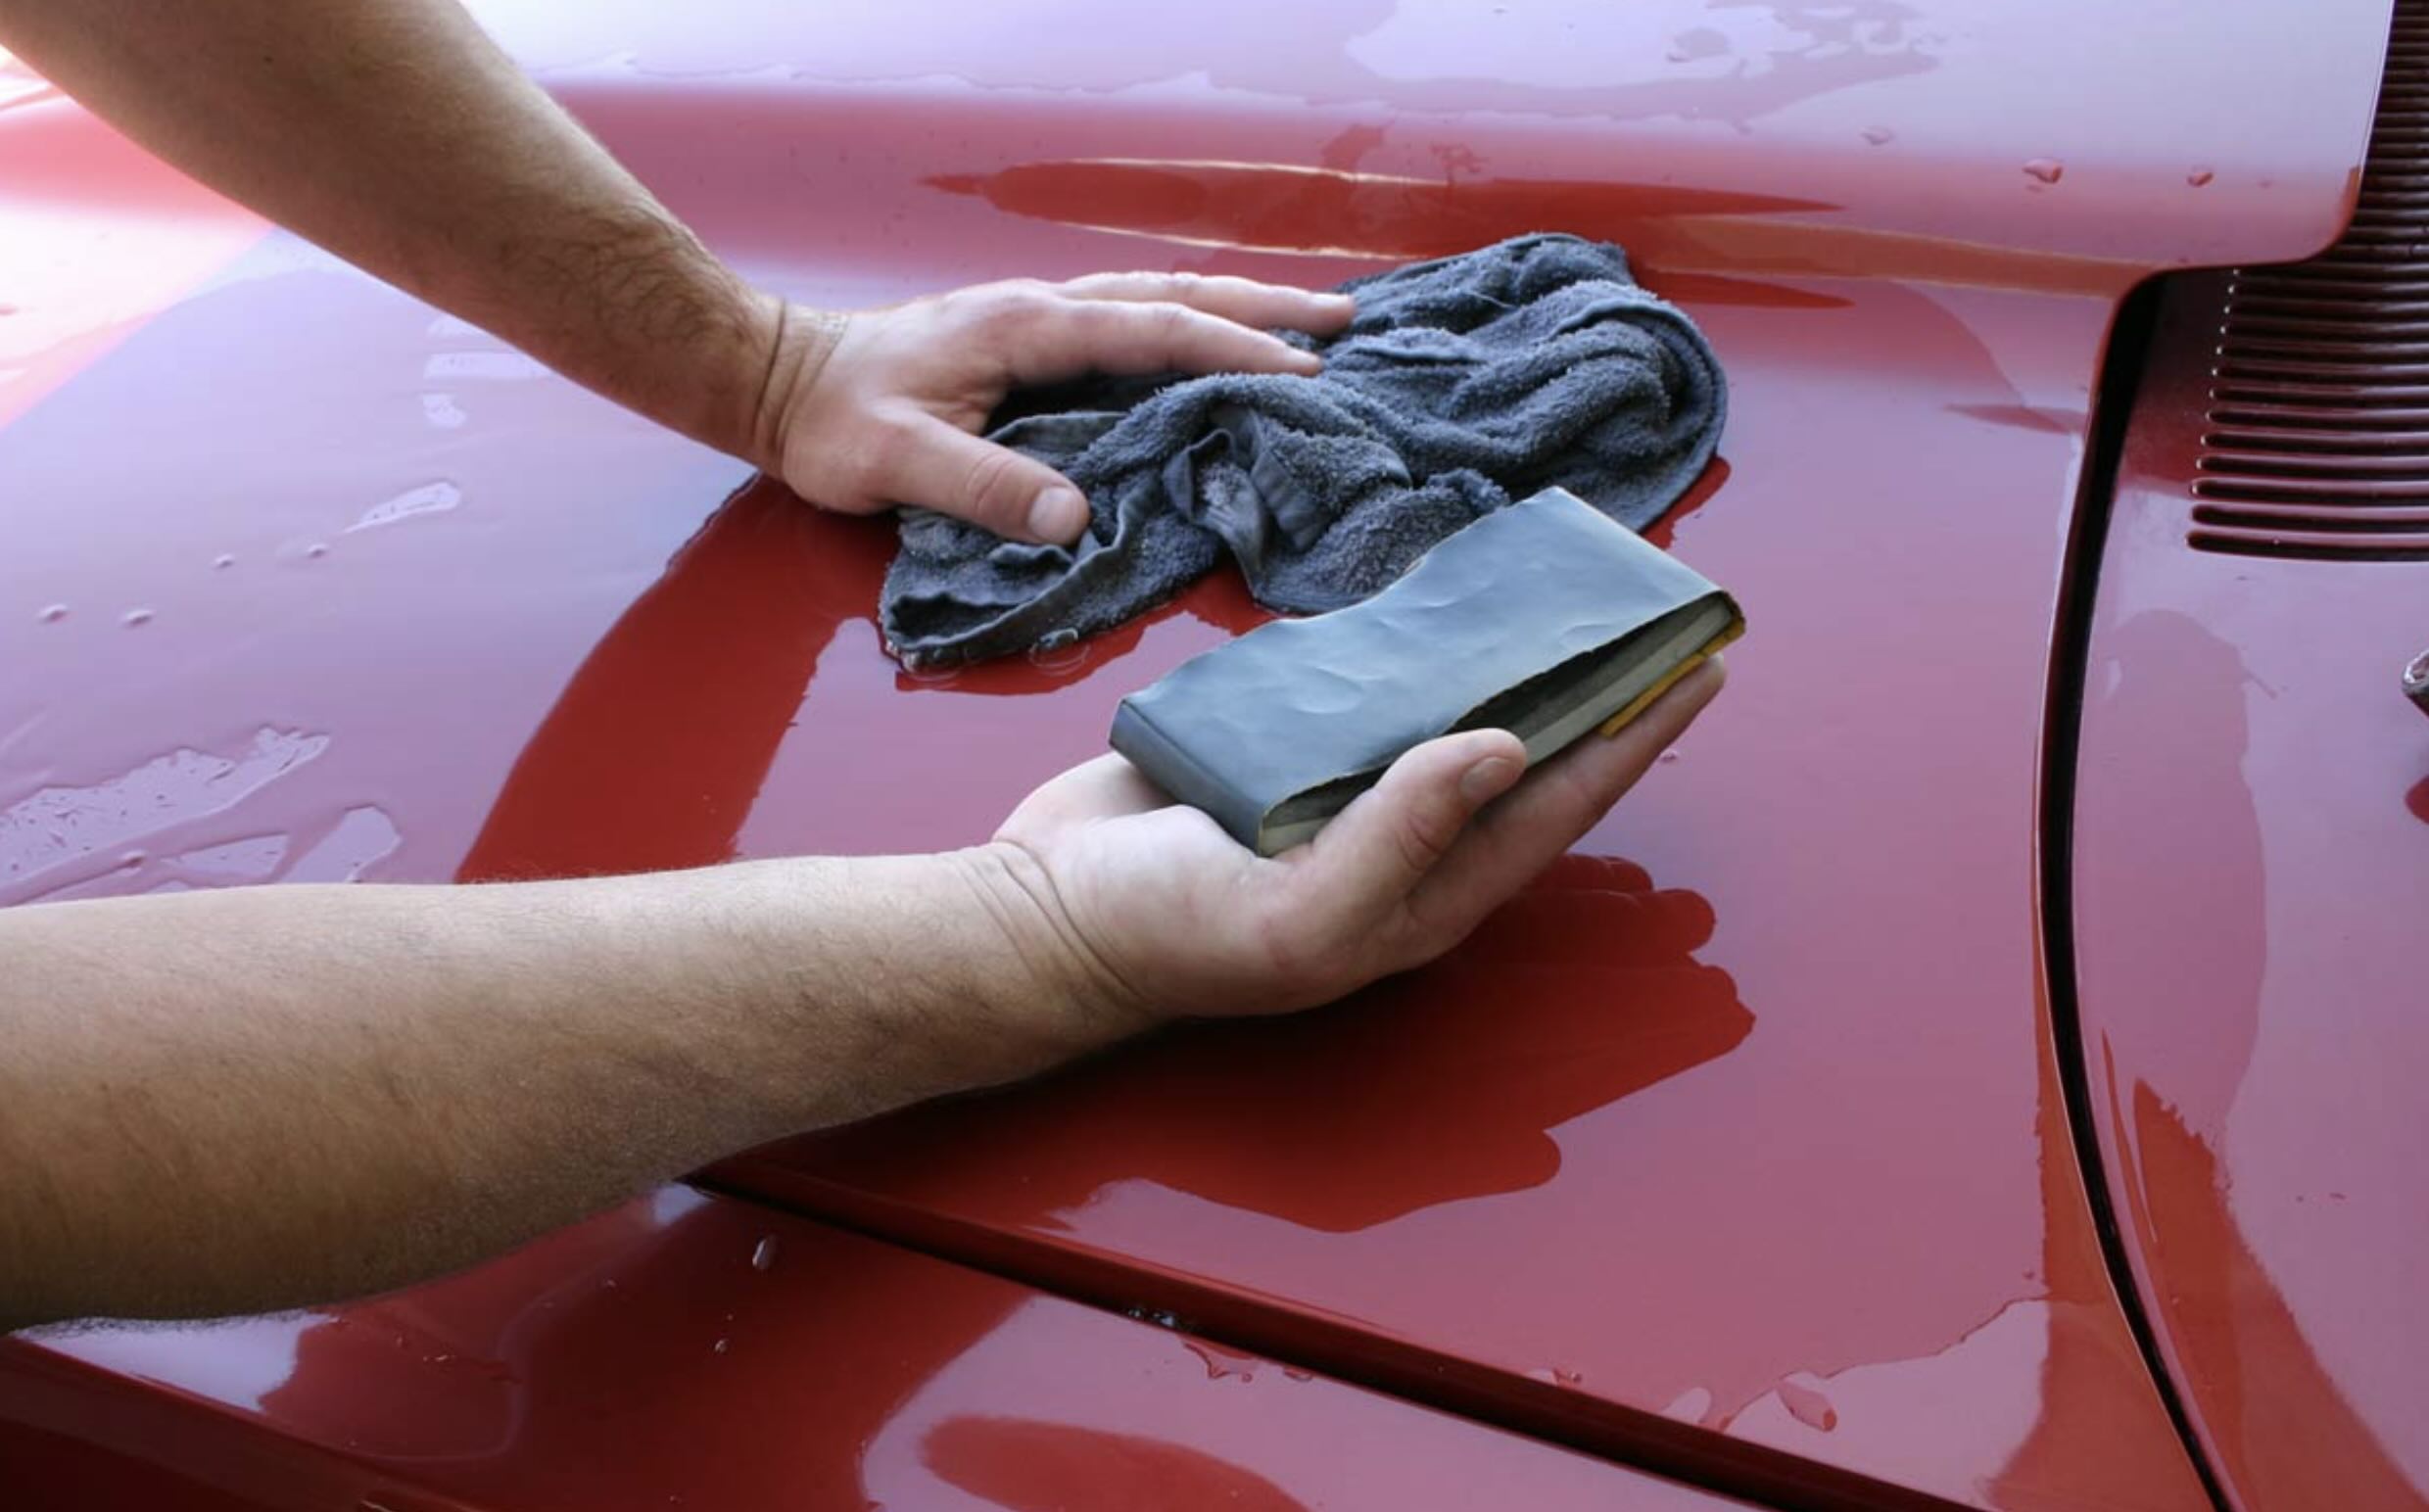 What Grit Sandpaper To Remove Scratches From Car